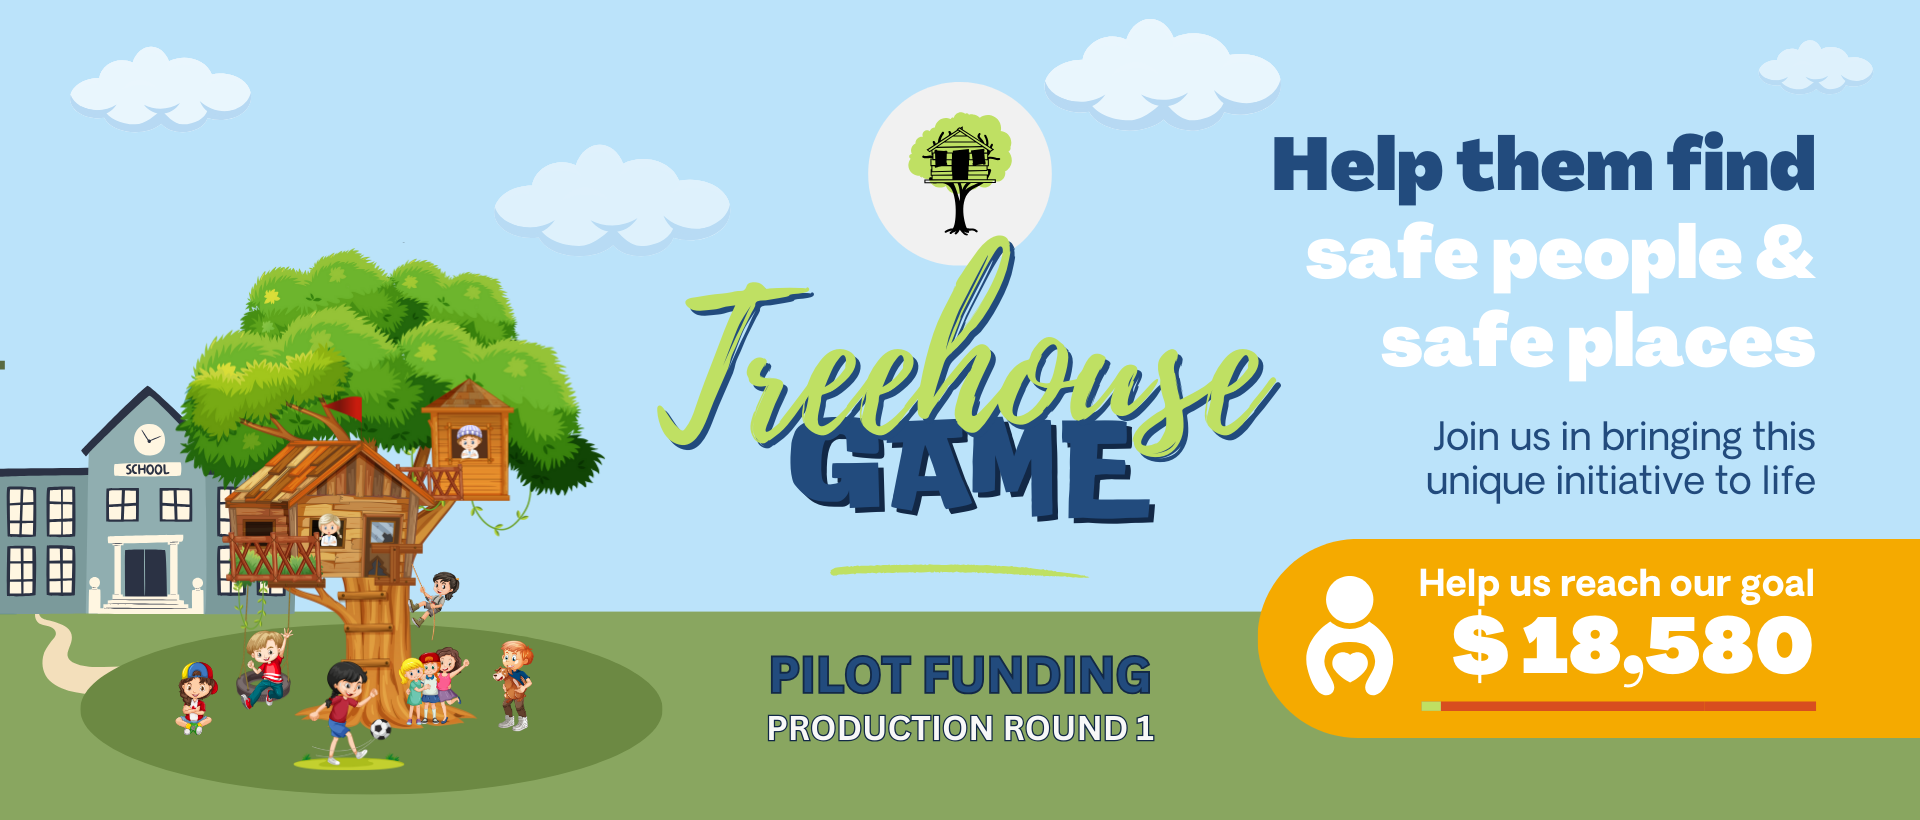 TreehouseGame Banner_Crowdfunding